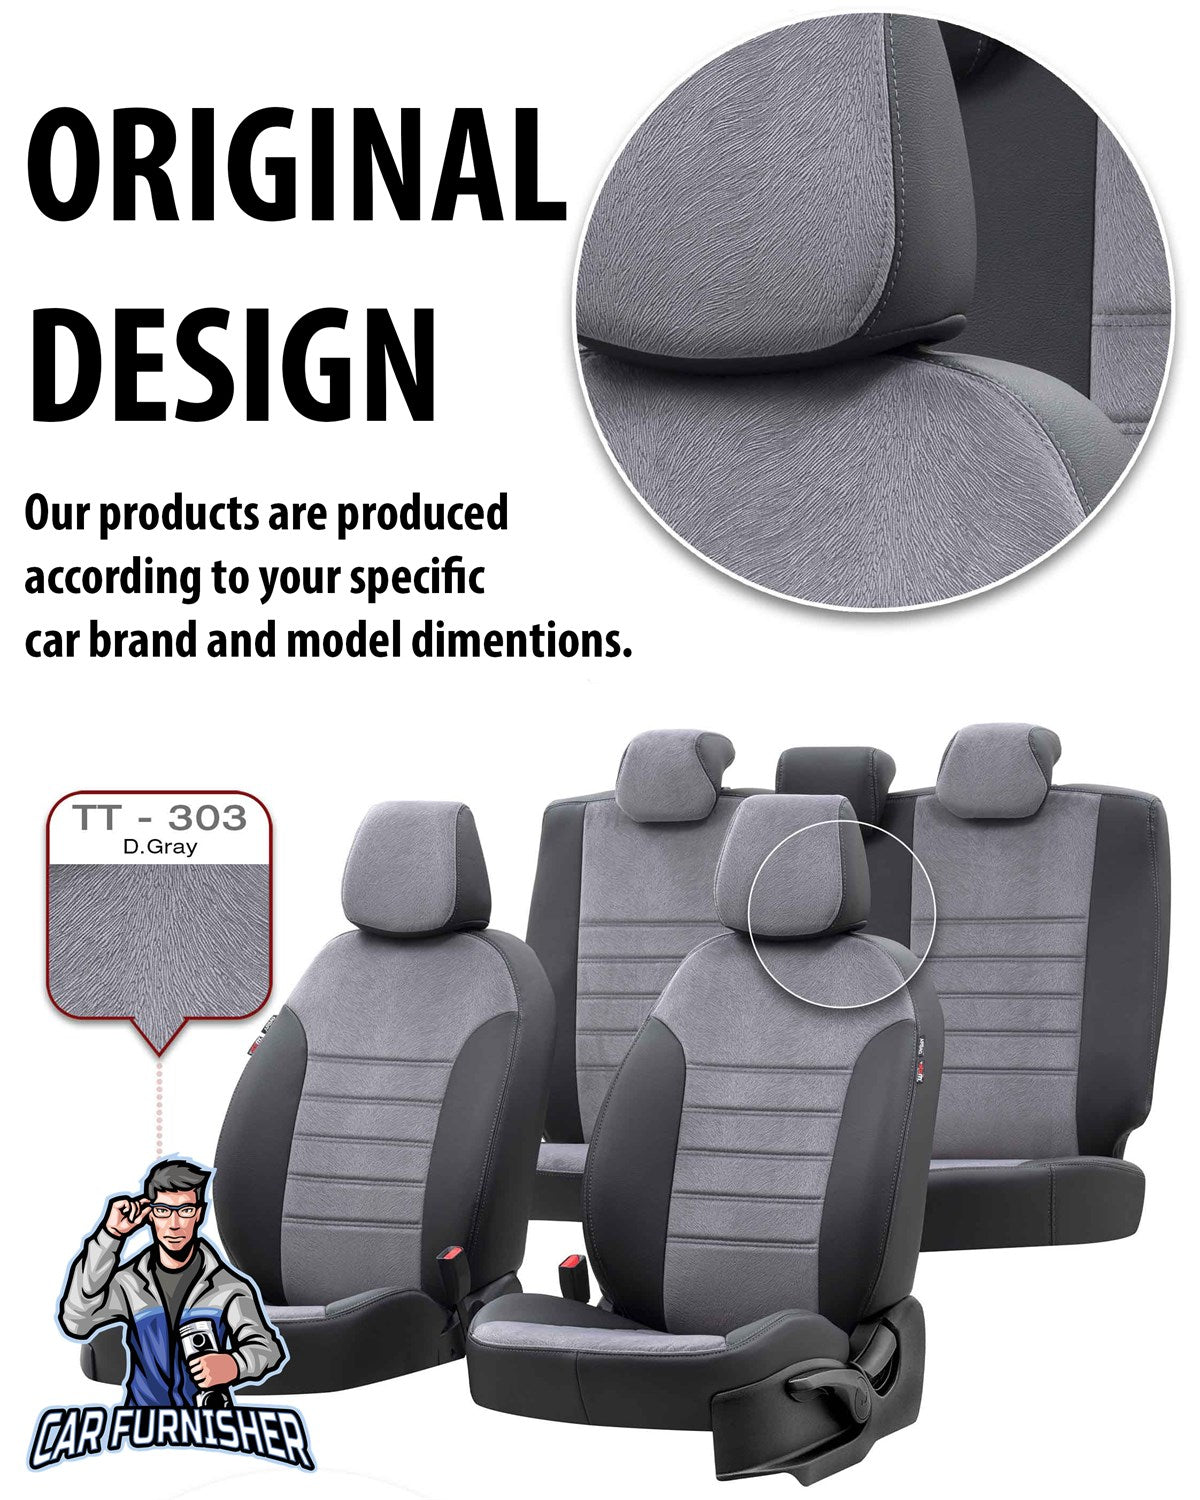 Volkswagen Jetta Seat Cover London Foal Feather Design Smoked Black Leather & Foal Feather